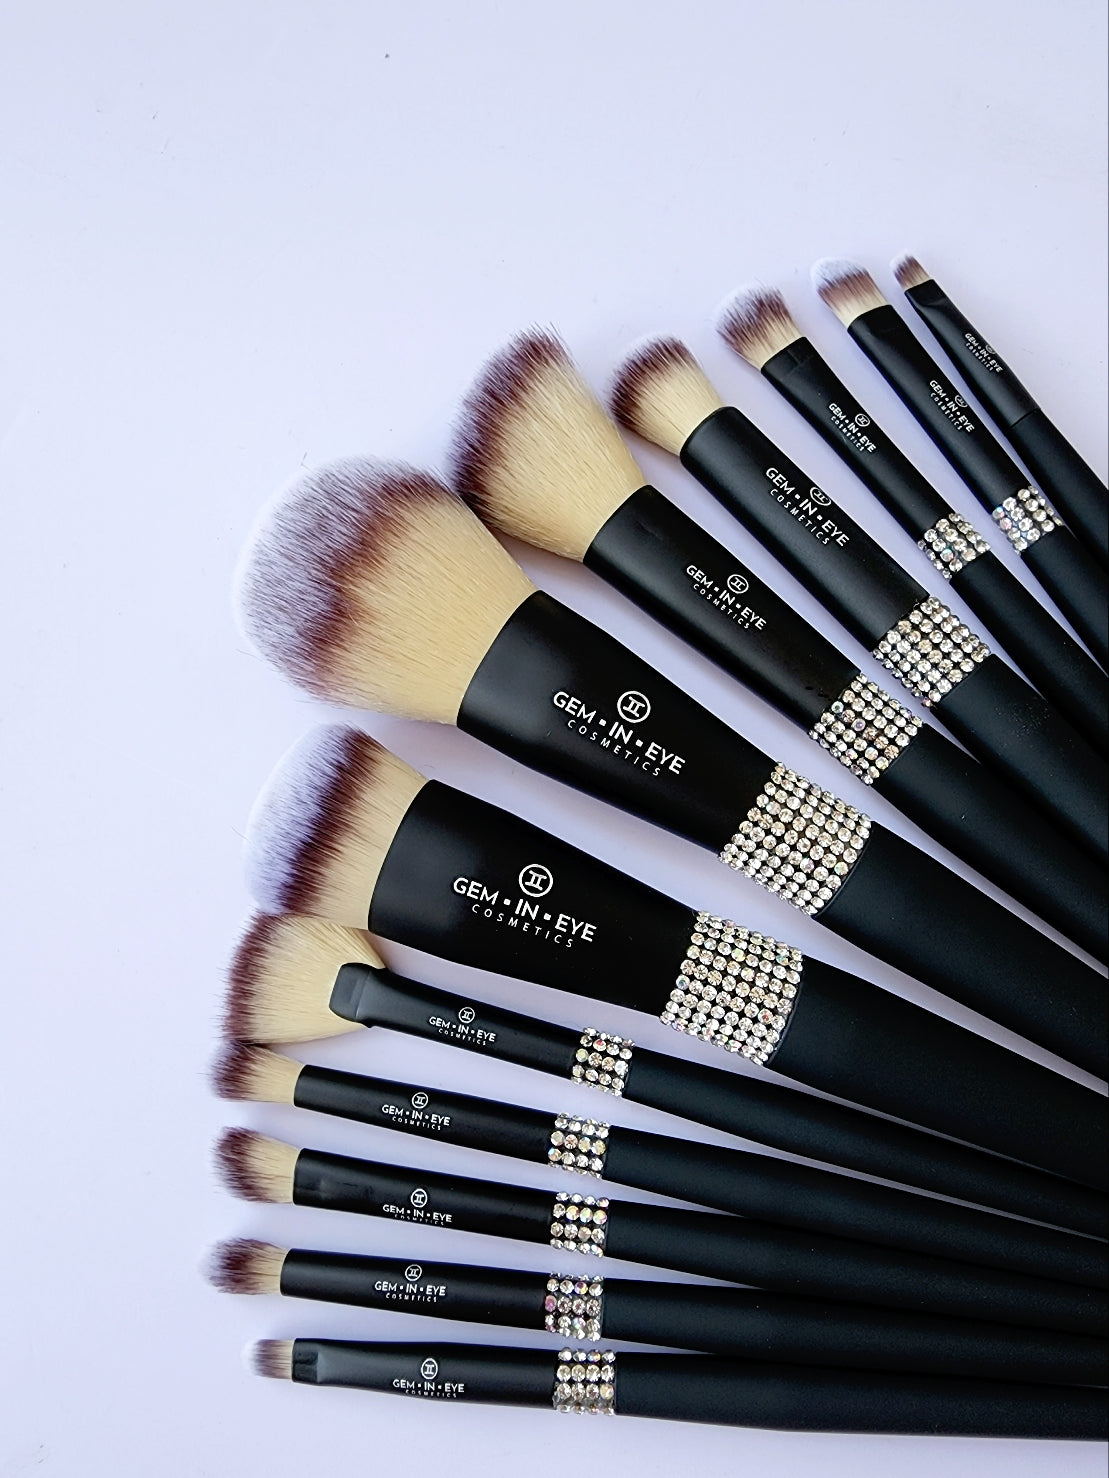 Professional Makeup Brushes in High Quality Matte Finish. Ultra soft and dense non irritating bristles. 